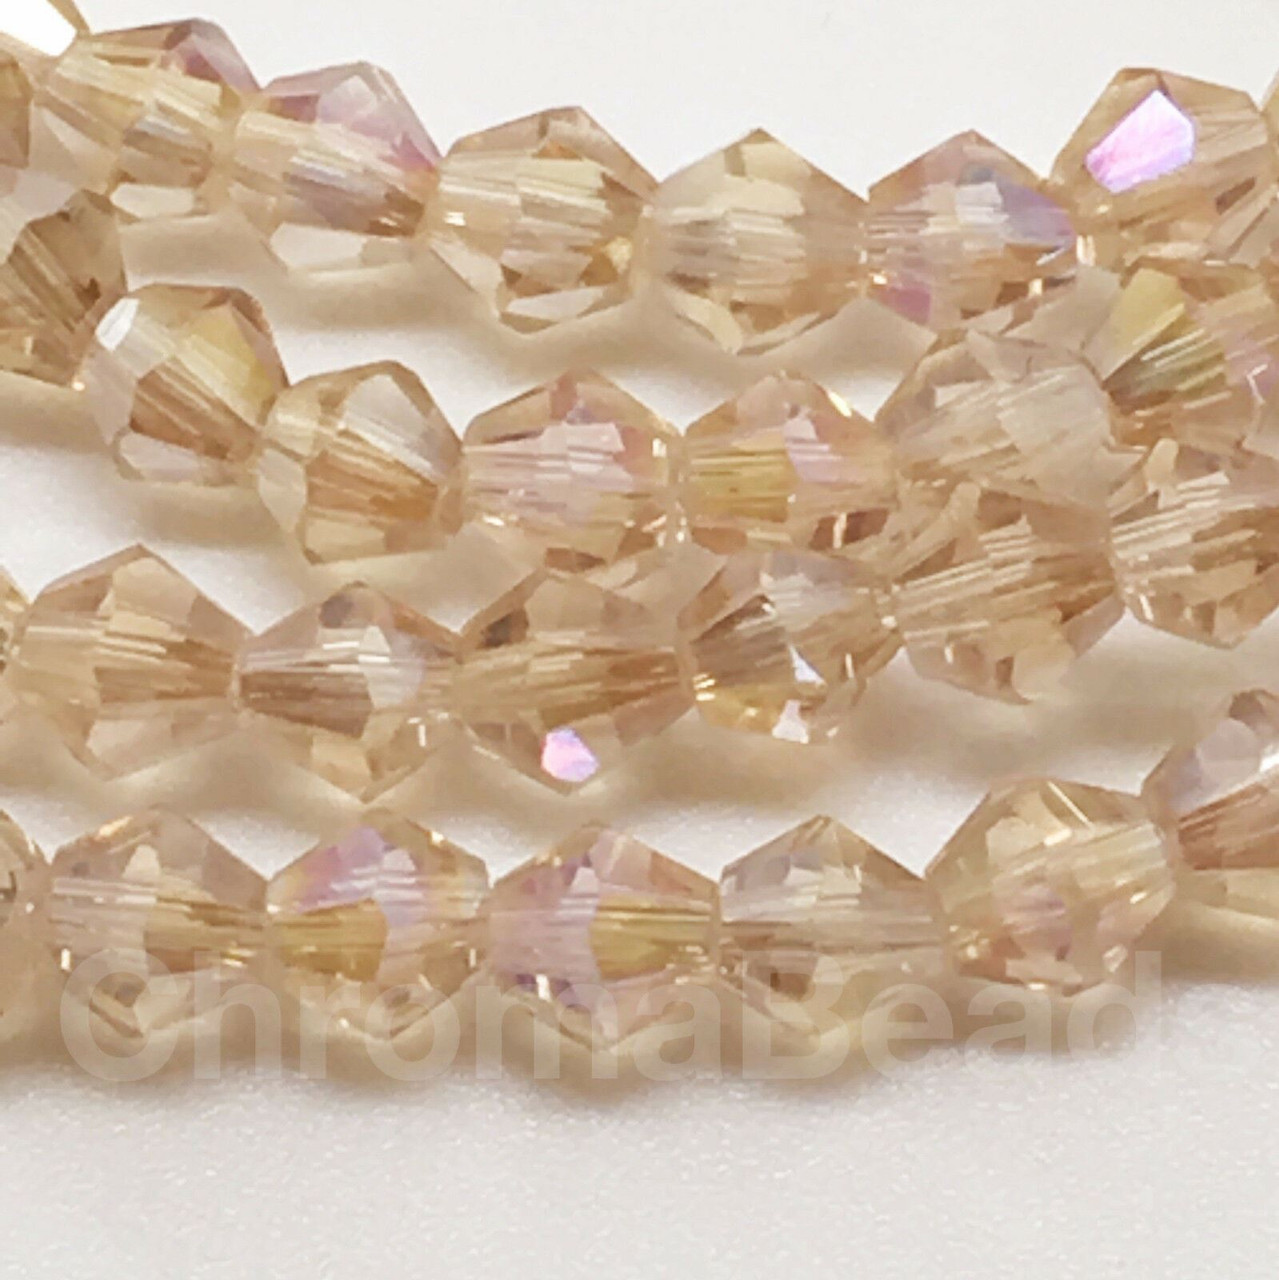 4mm Glass Bicone beads - HINT OF COPPER AB - approx 16" strand (115-120 beads)